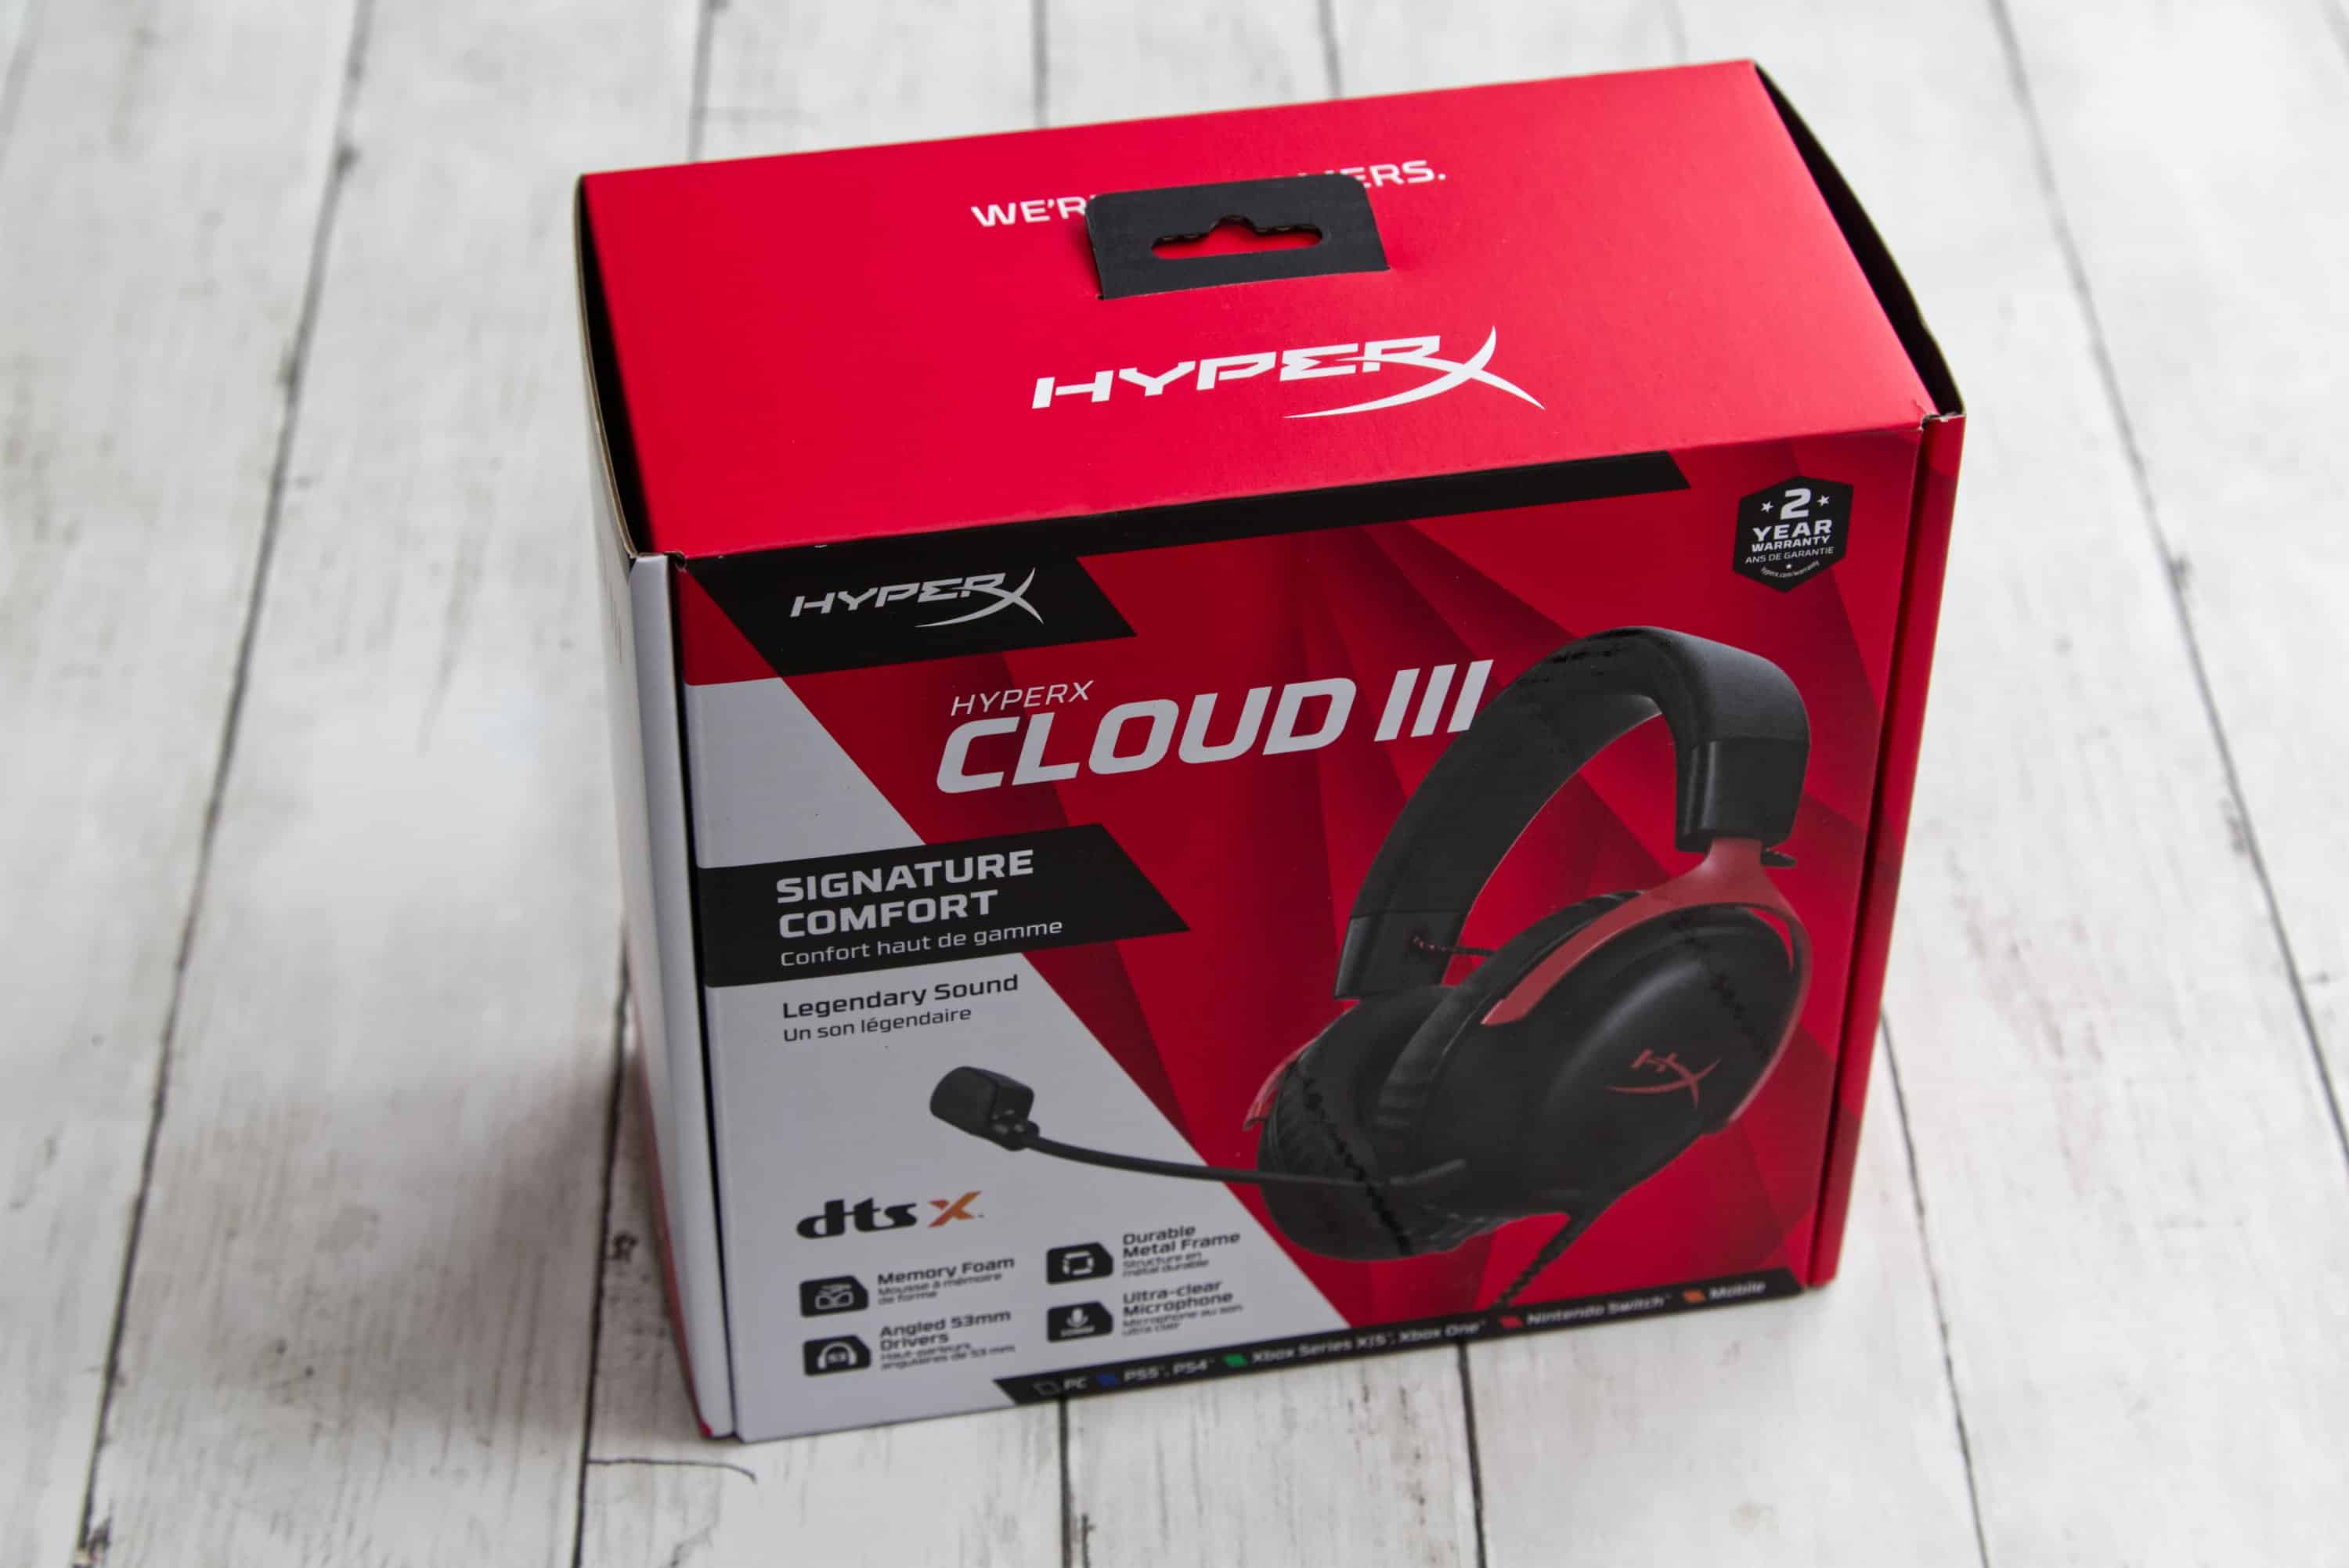 HyperX Cloud III review - the next generation of gaming headsets